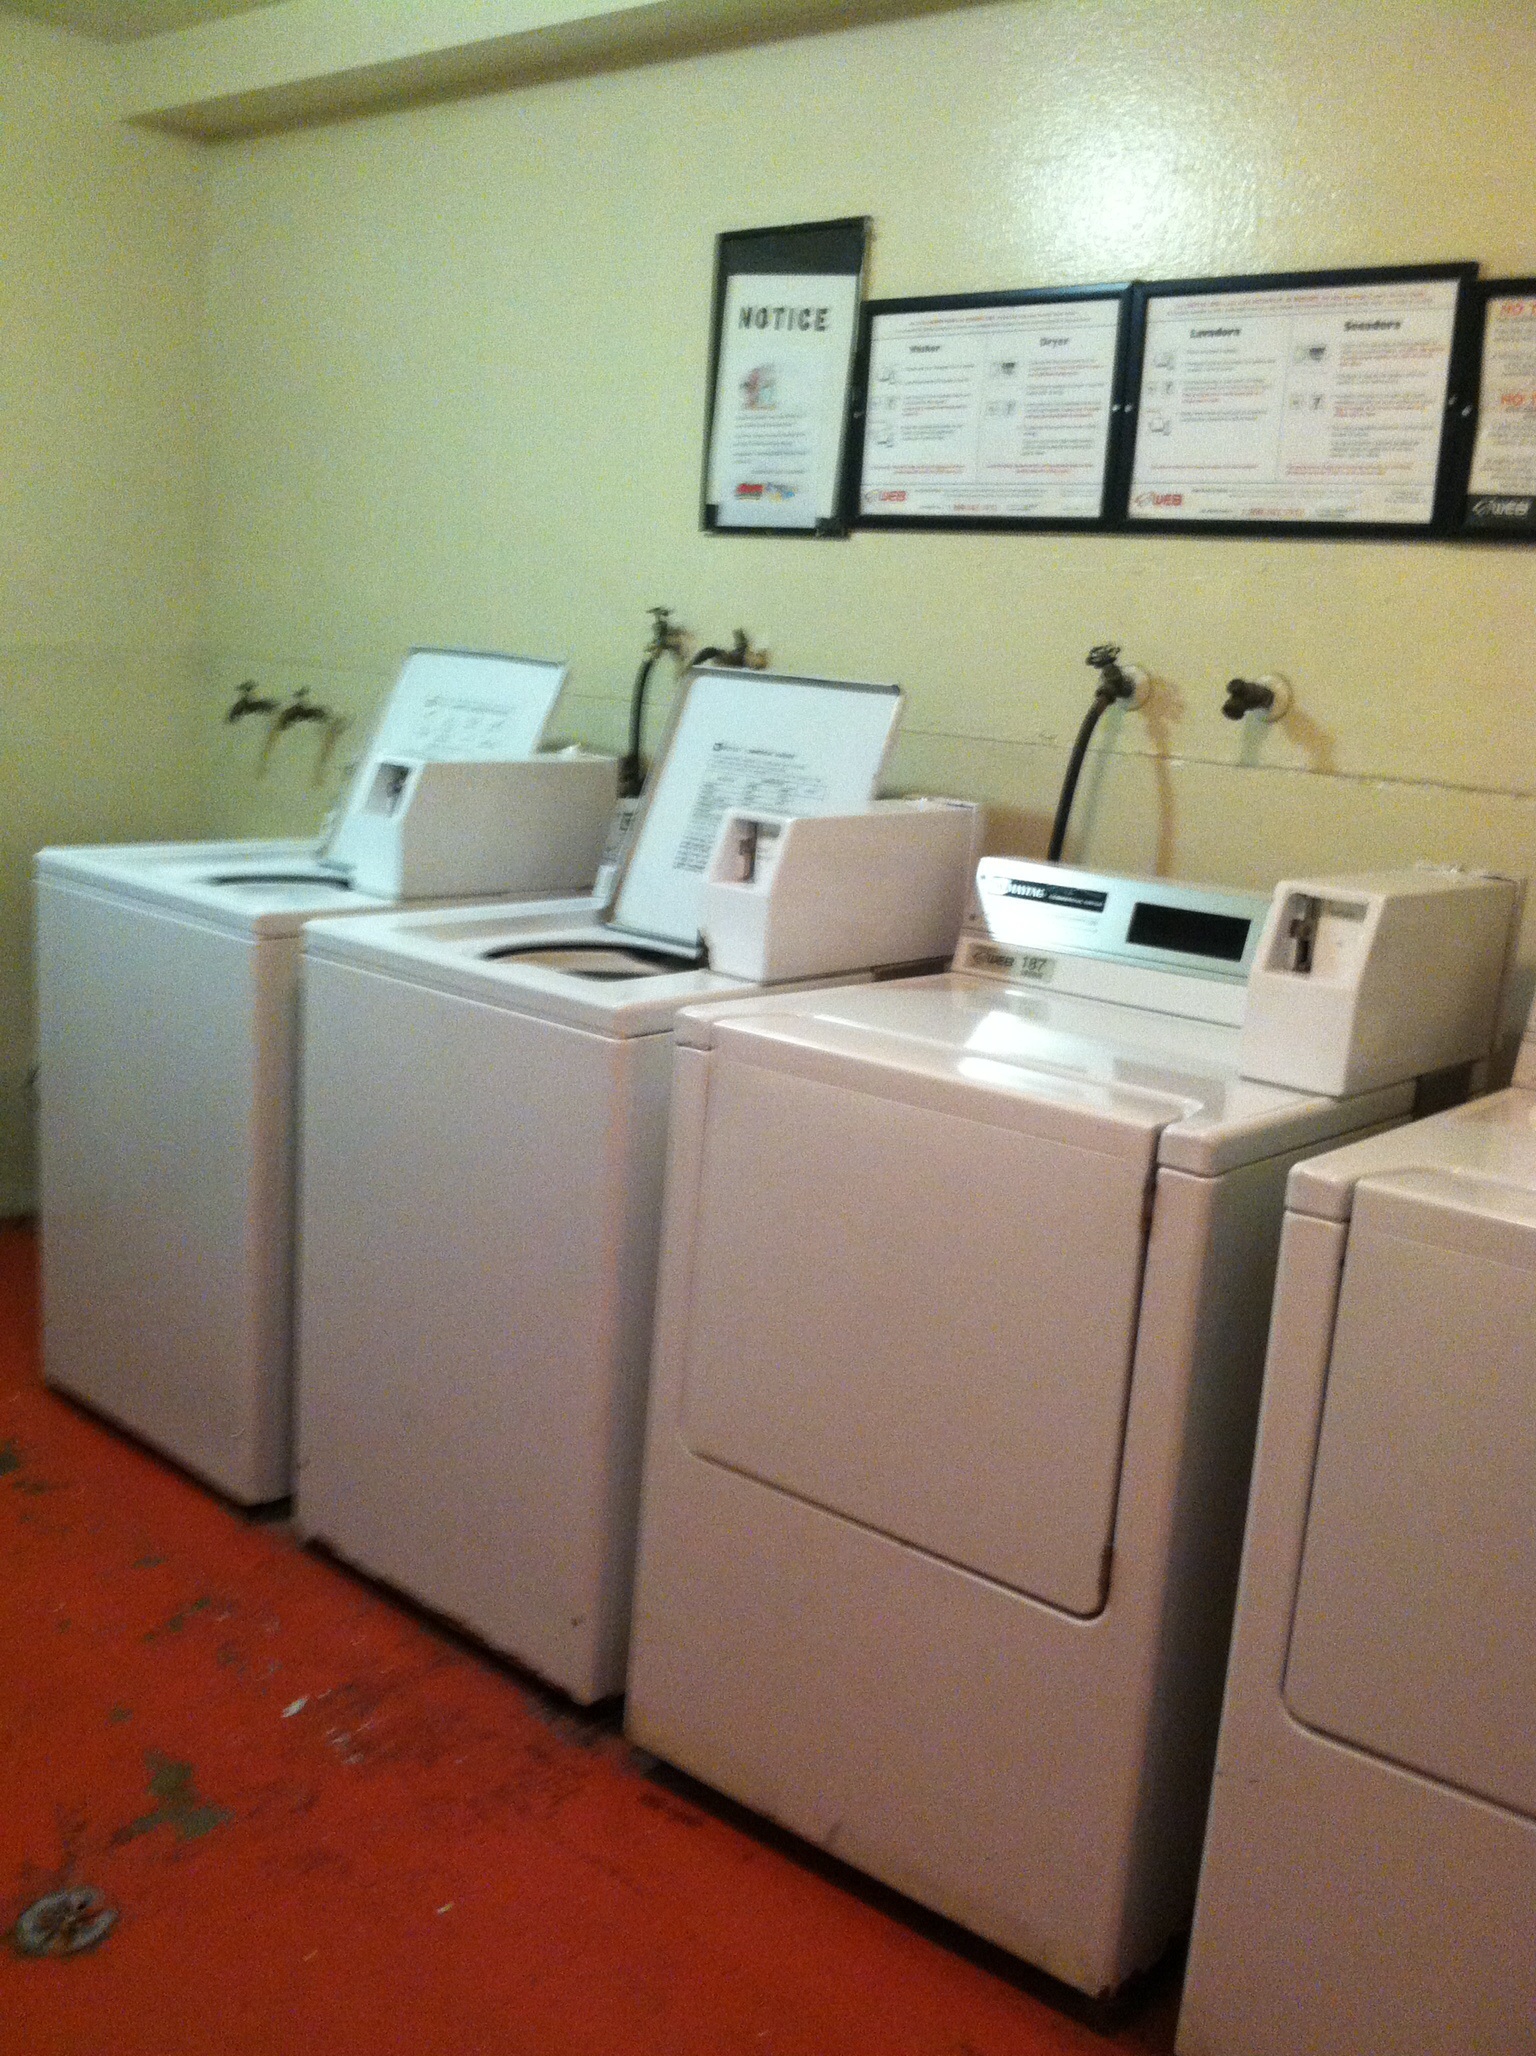 Interior view of a laundry room at Ingram Preservation Properties showing two washers and dryers